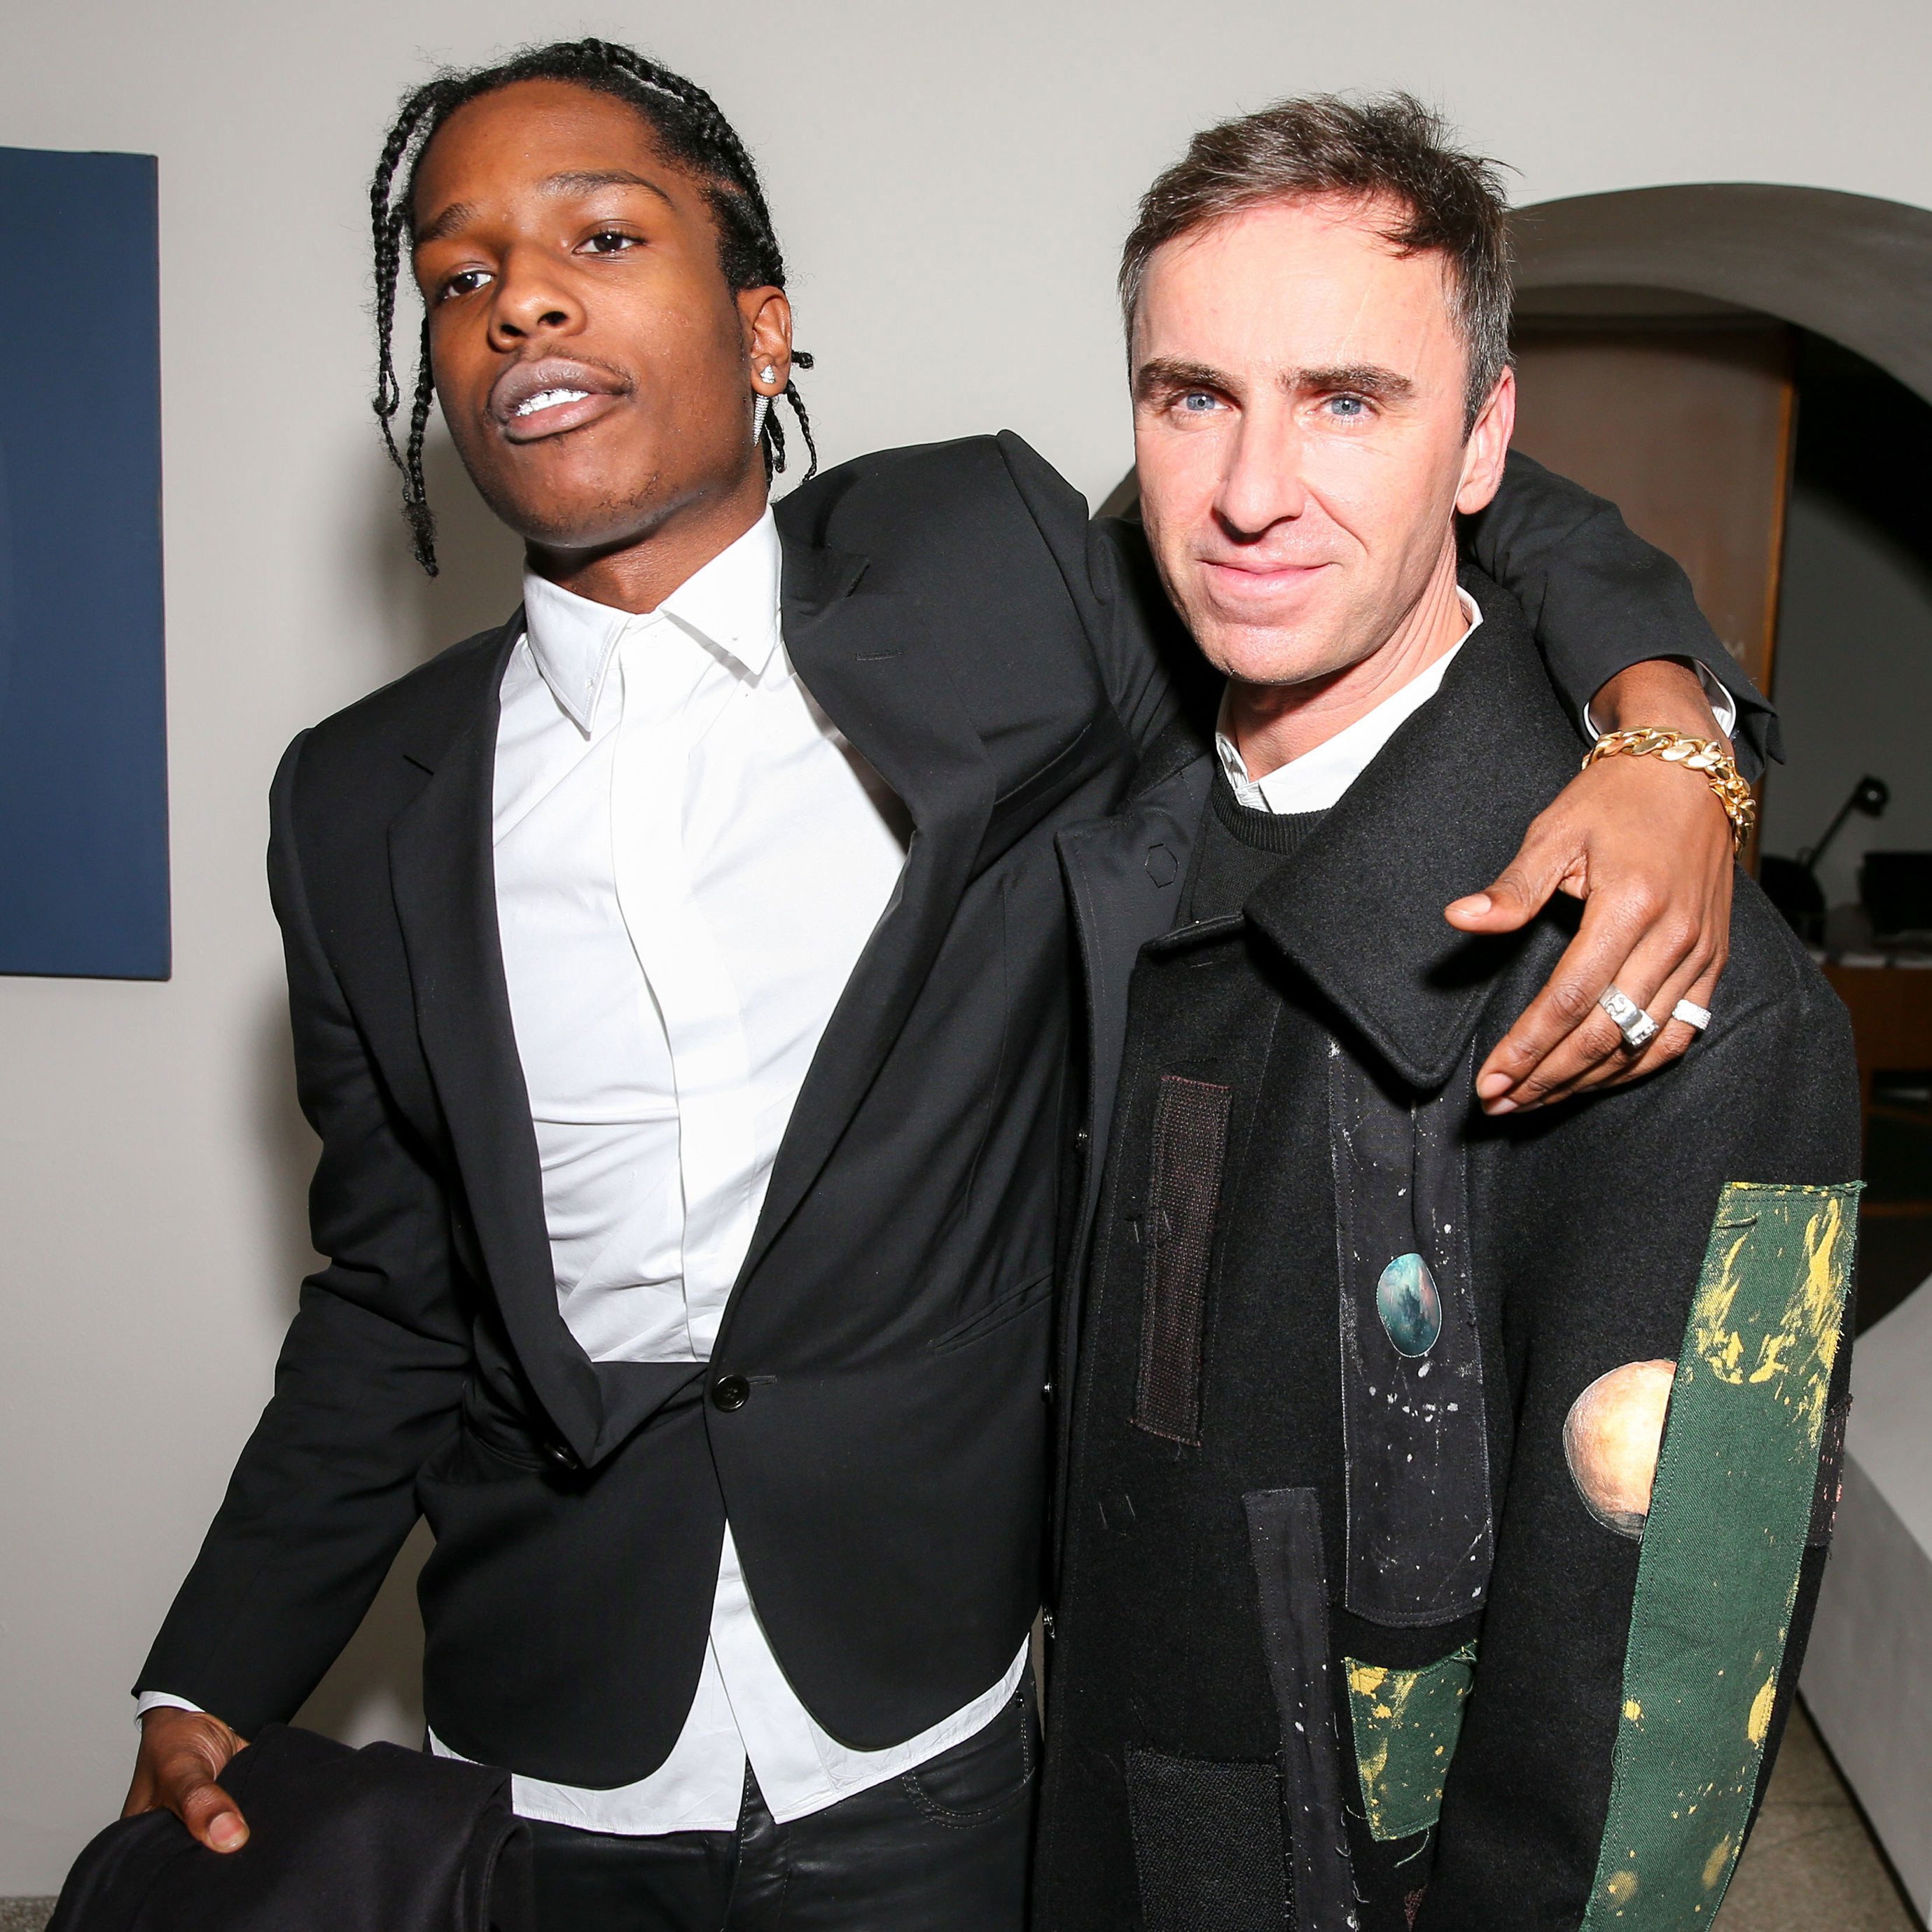 Raf Simons Talks To The Wall Street Journal About Underwear And A$AP Rocky